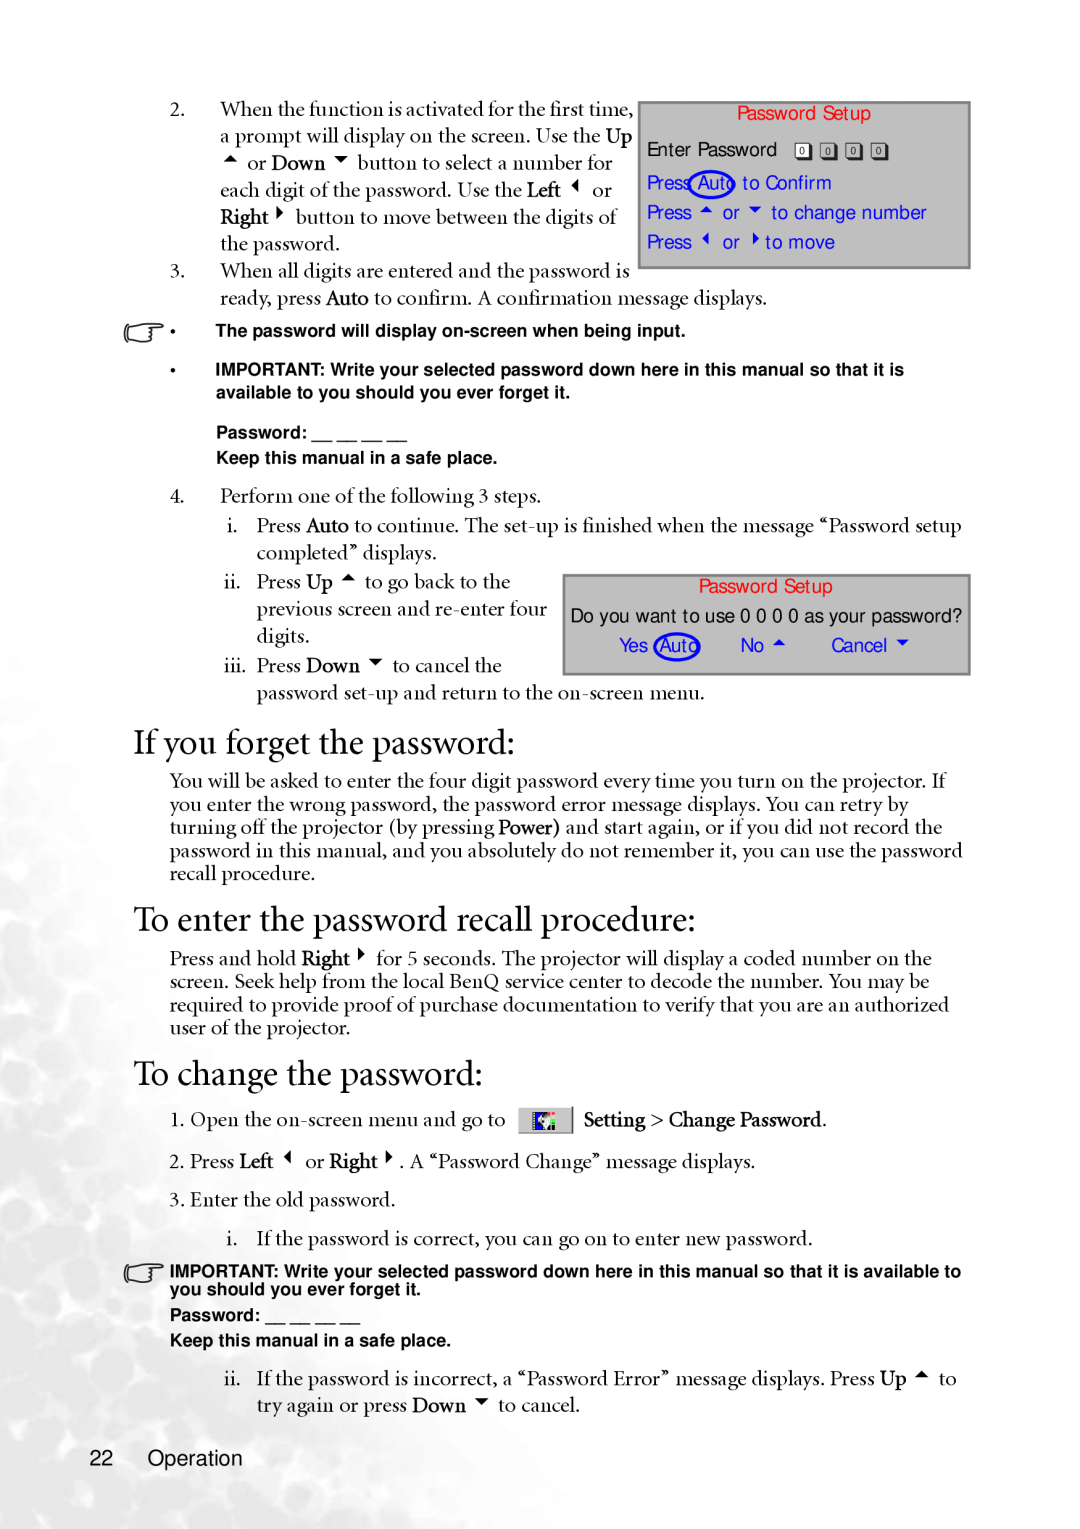 BenQ MP610 user manual If you forget the password, To enter the password recall procedure, To change the password 